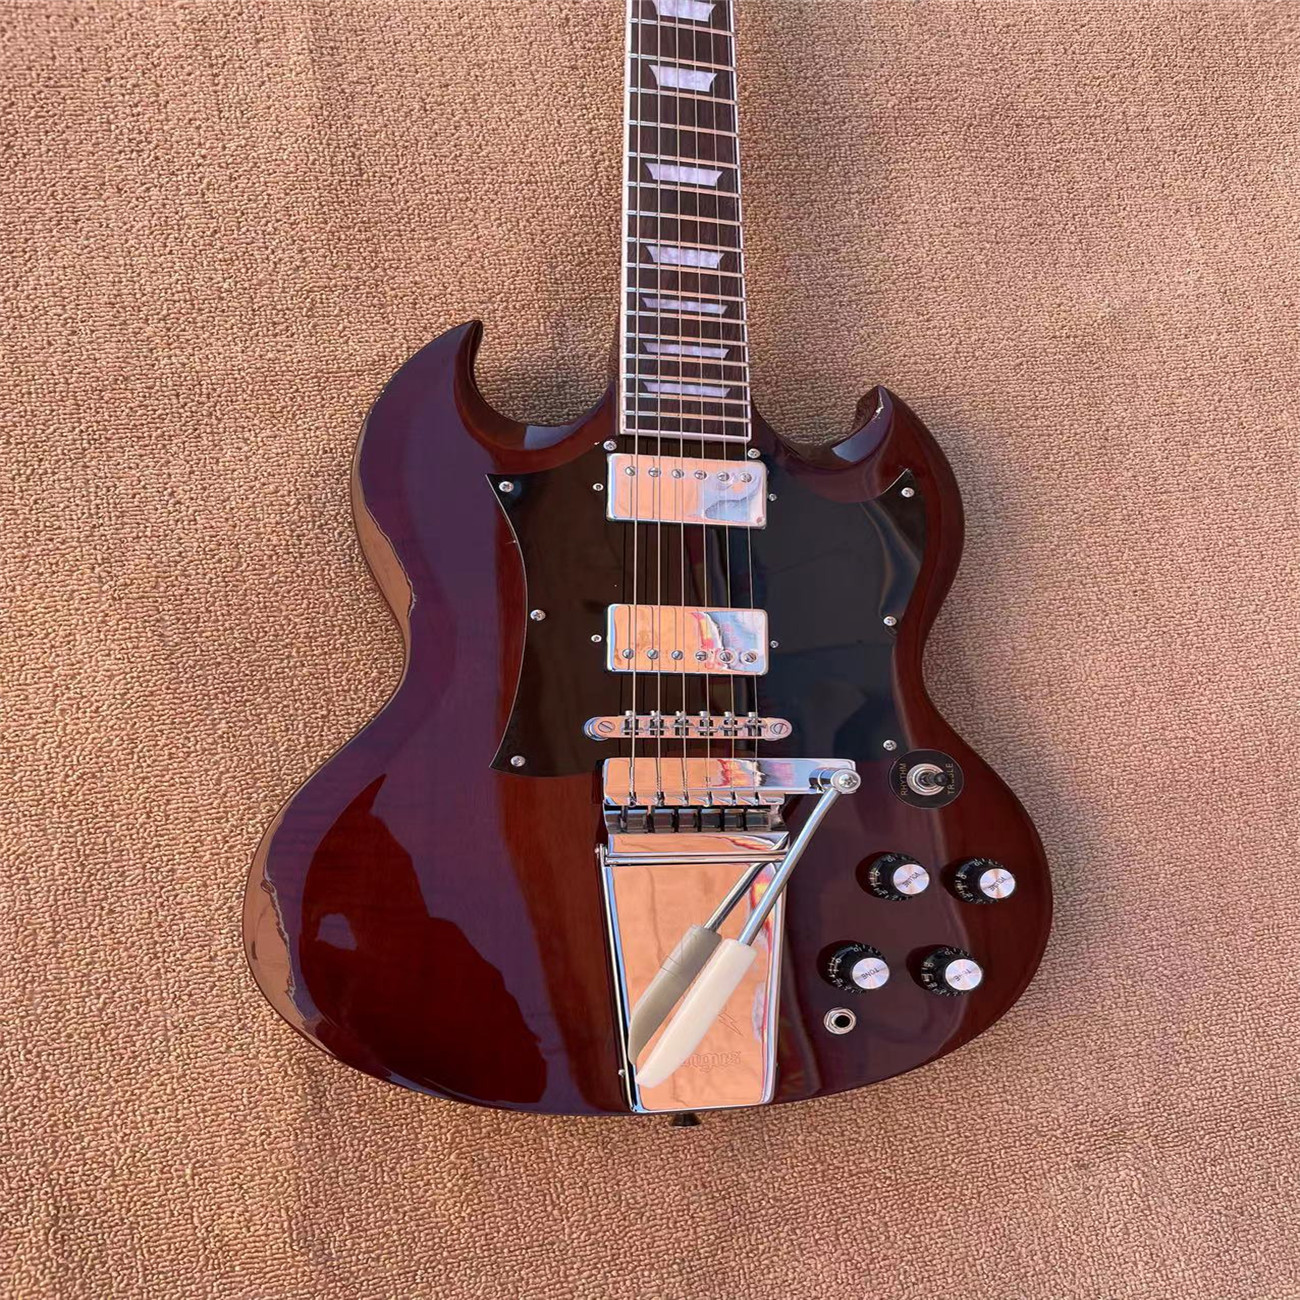 

6-string electric guitar, wine red paint, chrome plated hardware with vibrato, jade tone harmonic, black decorative board